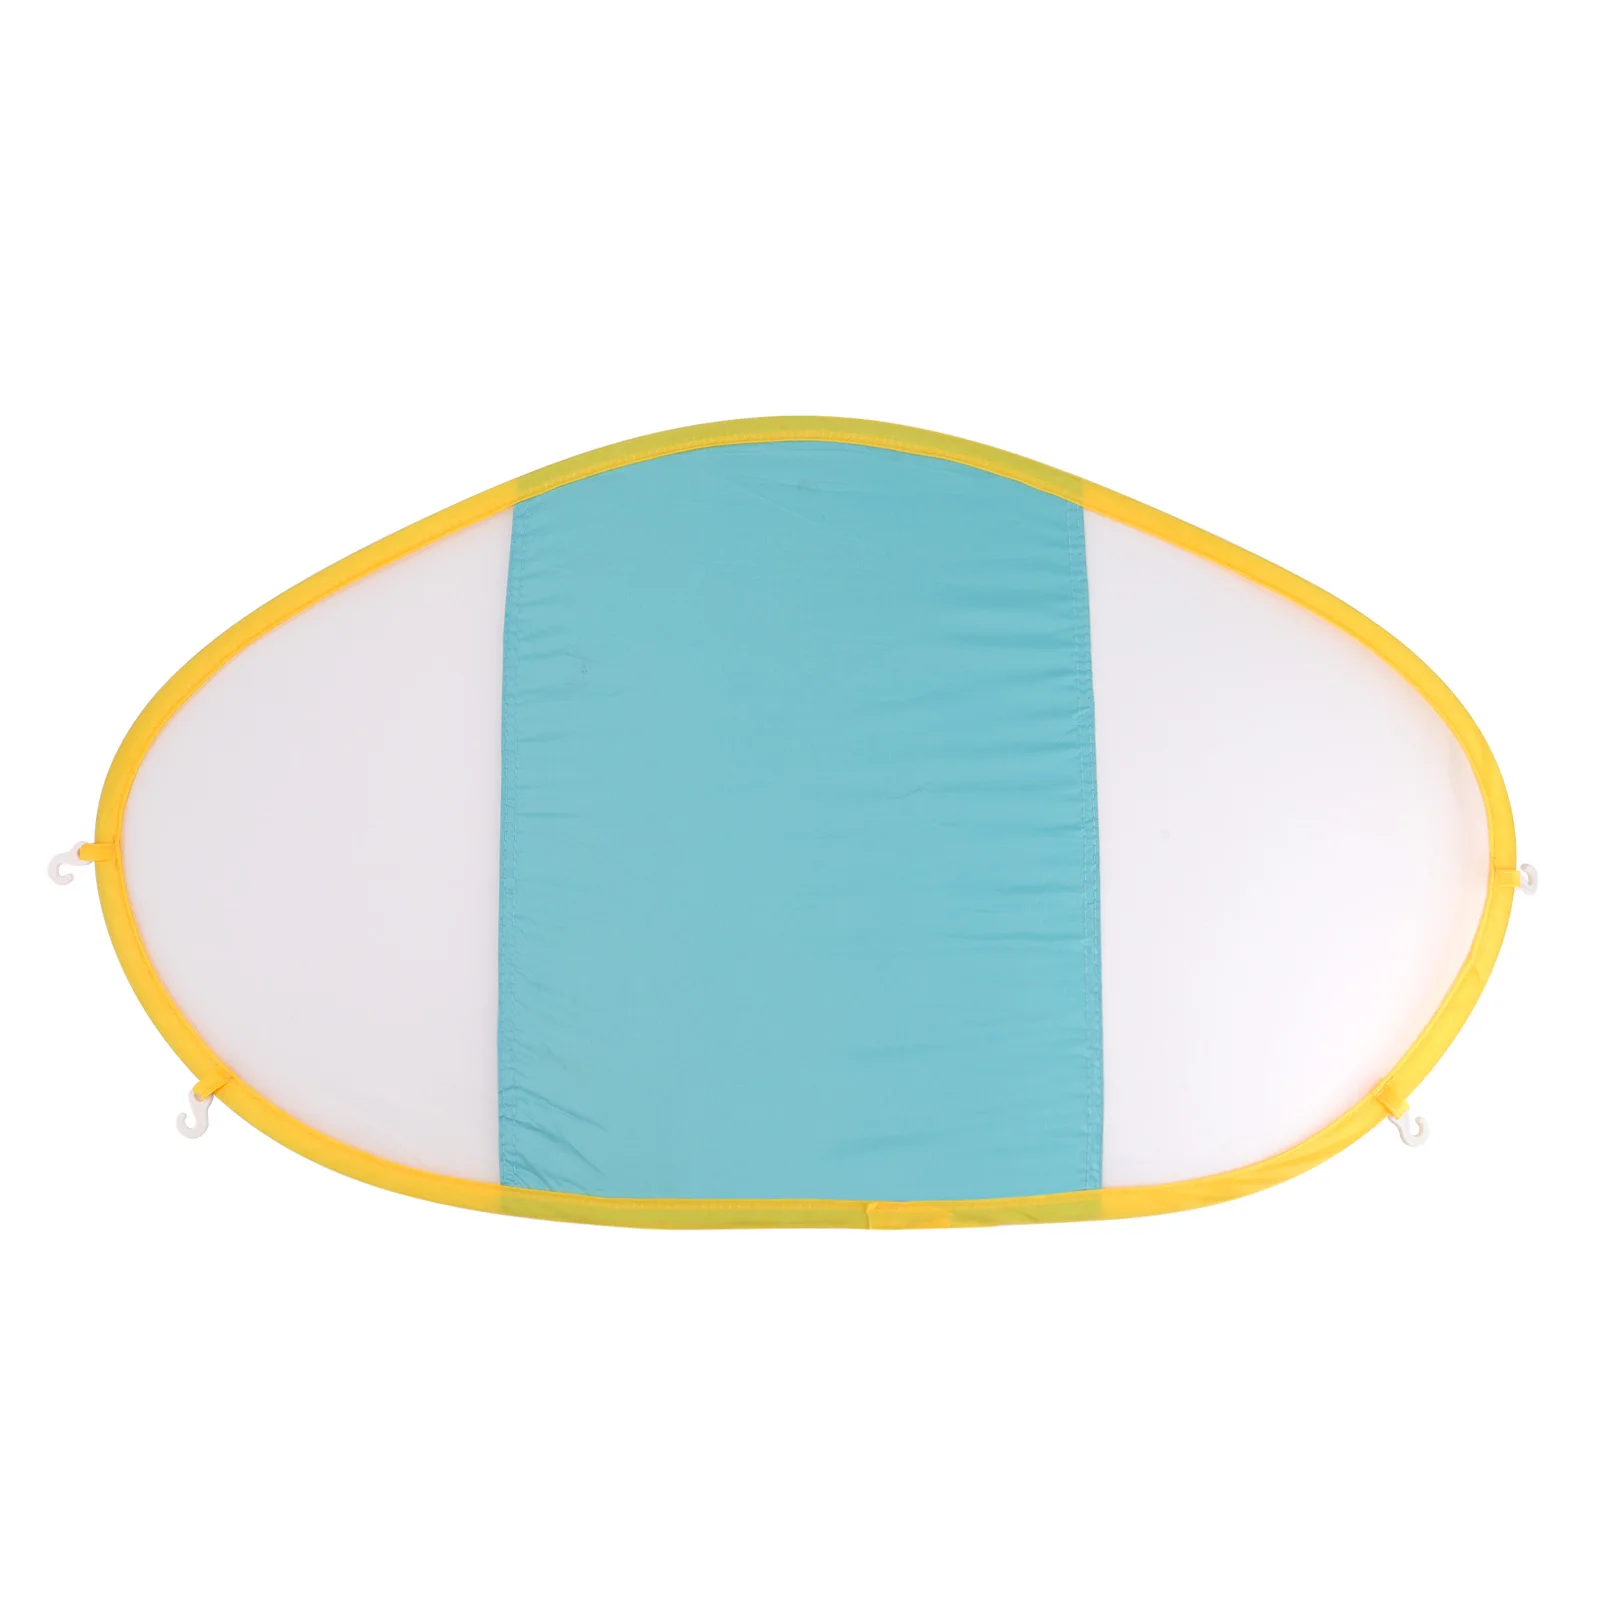 Baby Swim Float Removable Canopy UPF 50+ UV Sunshade Separately Only Can... - $14.00